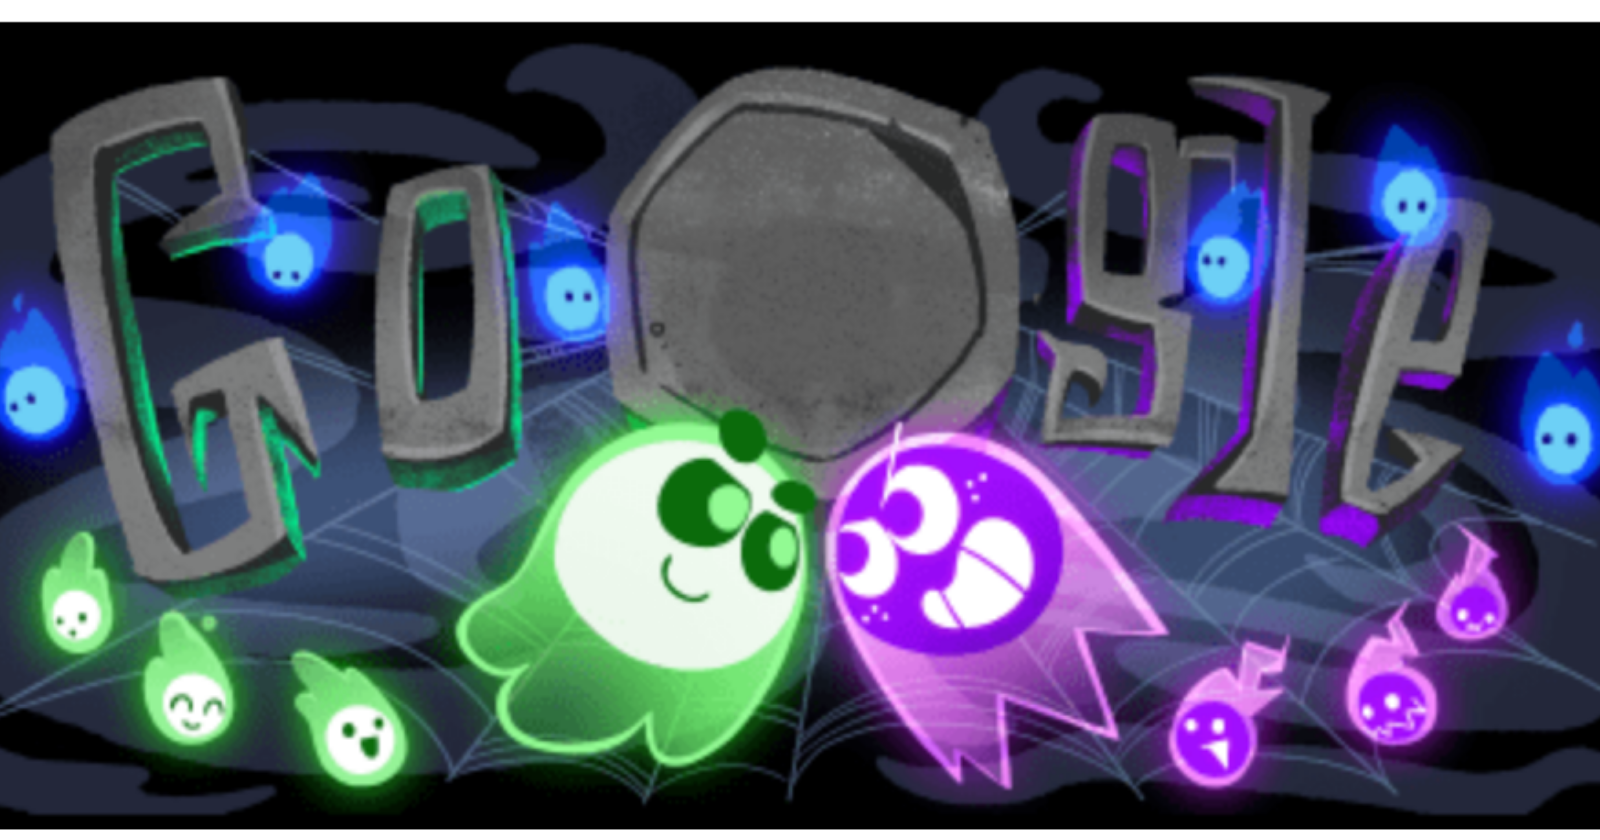 Check out Google's spooky Halloween Doodle - its first multiplayer